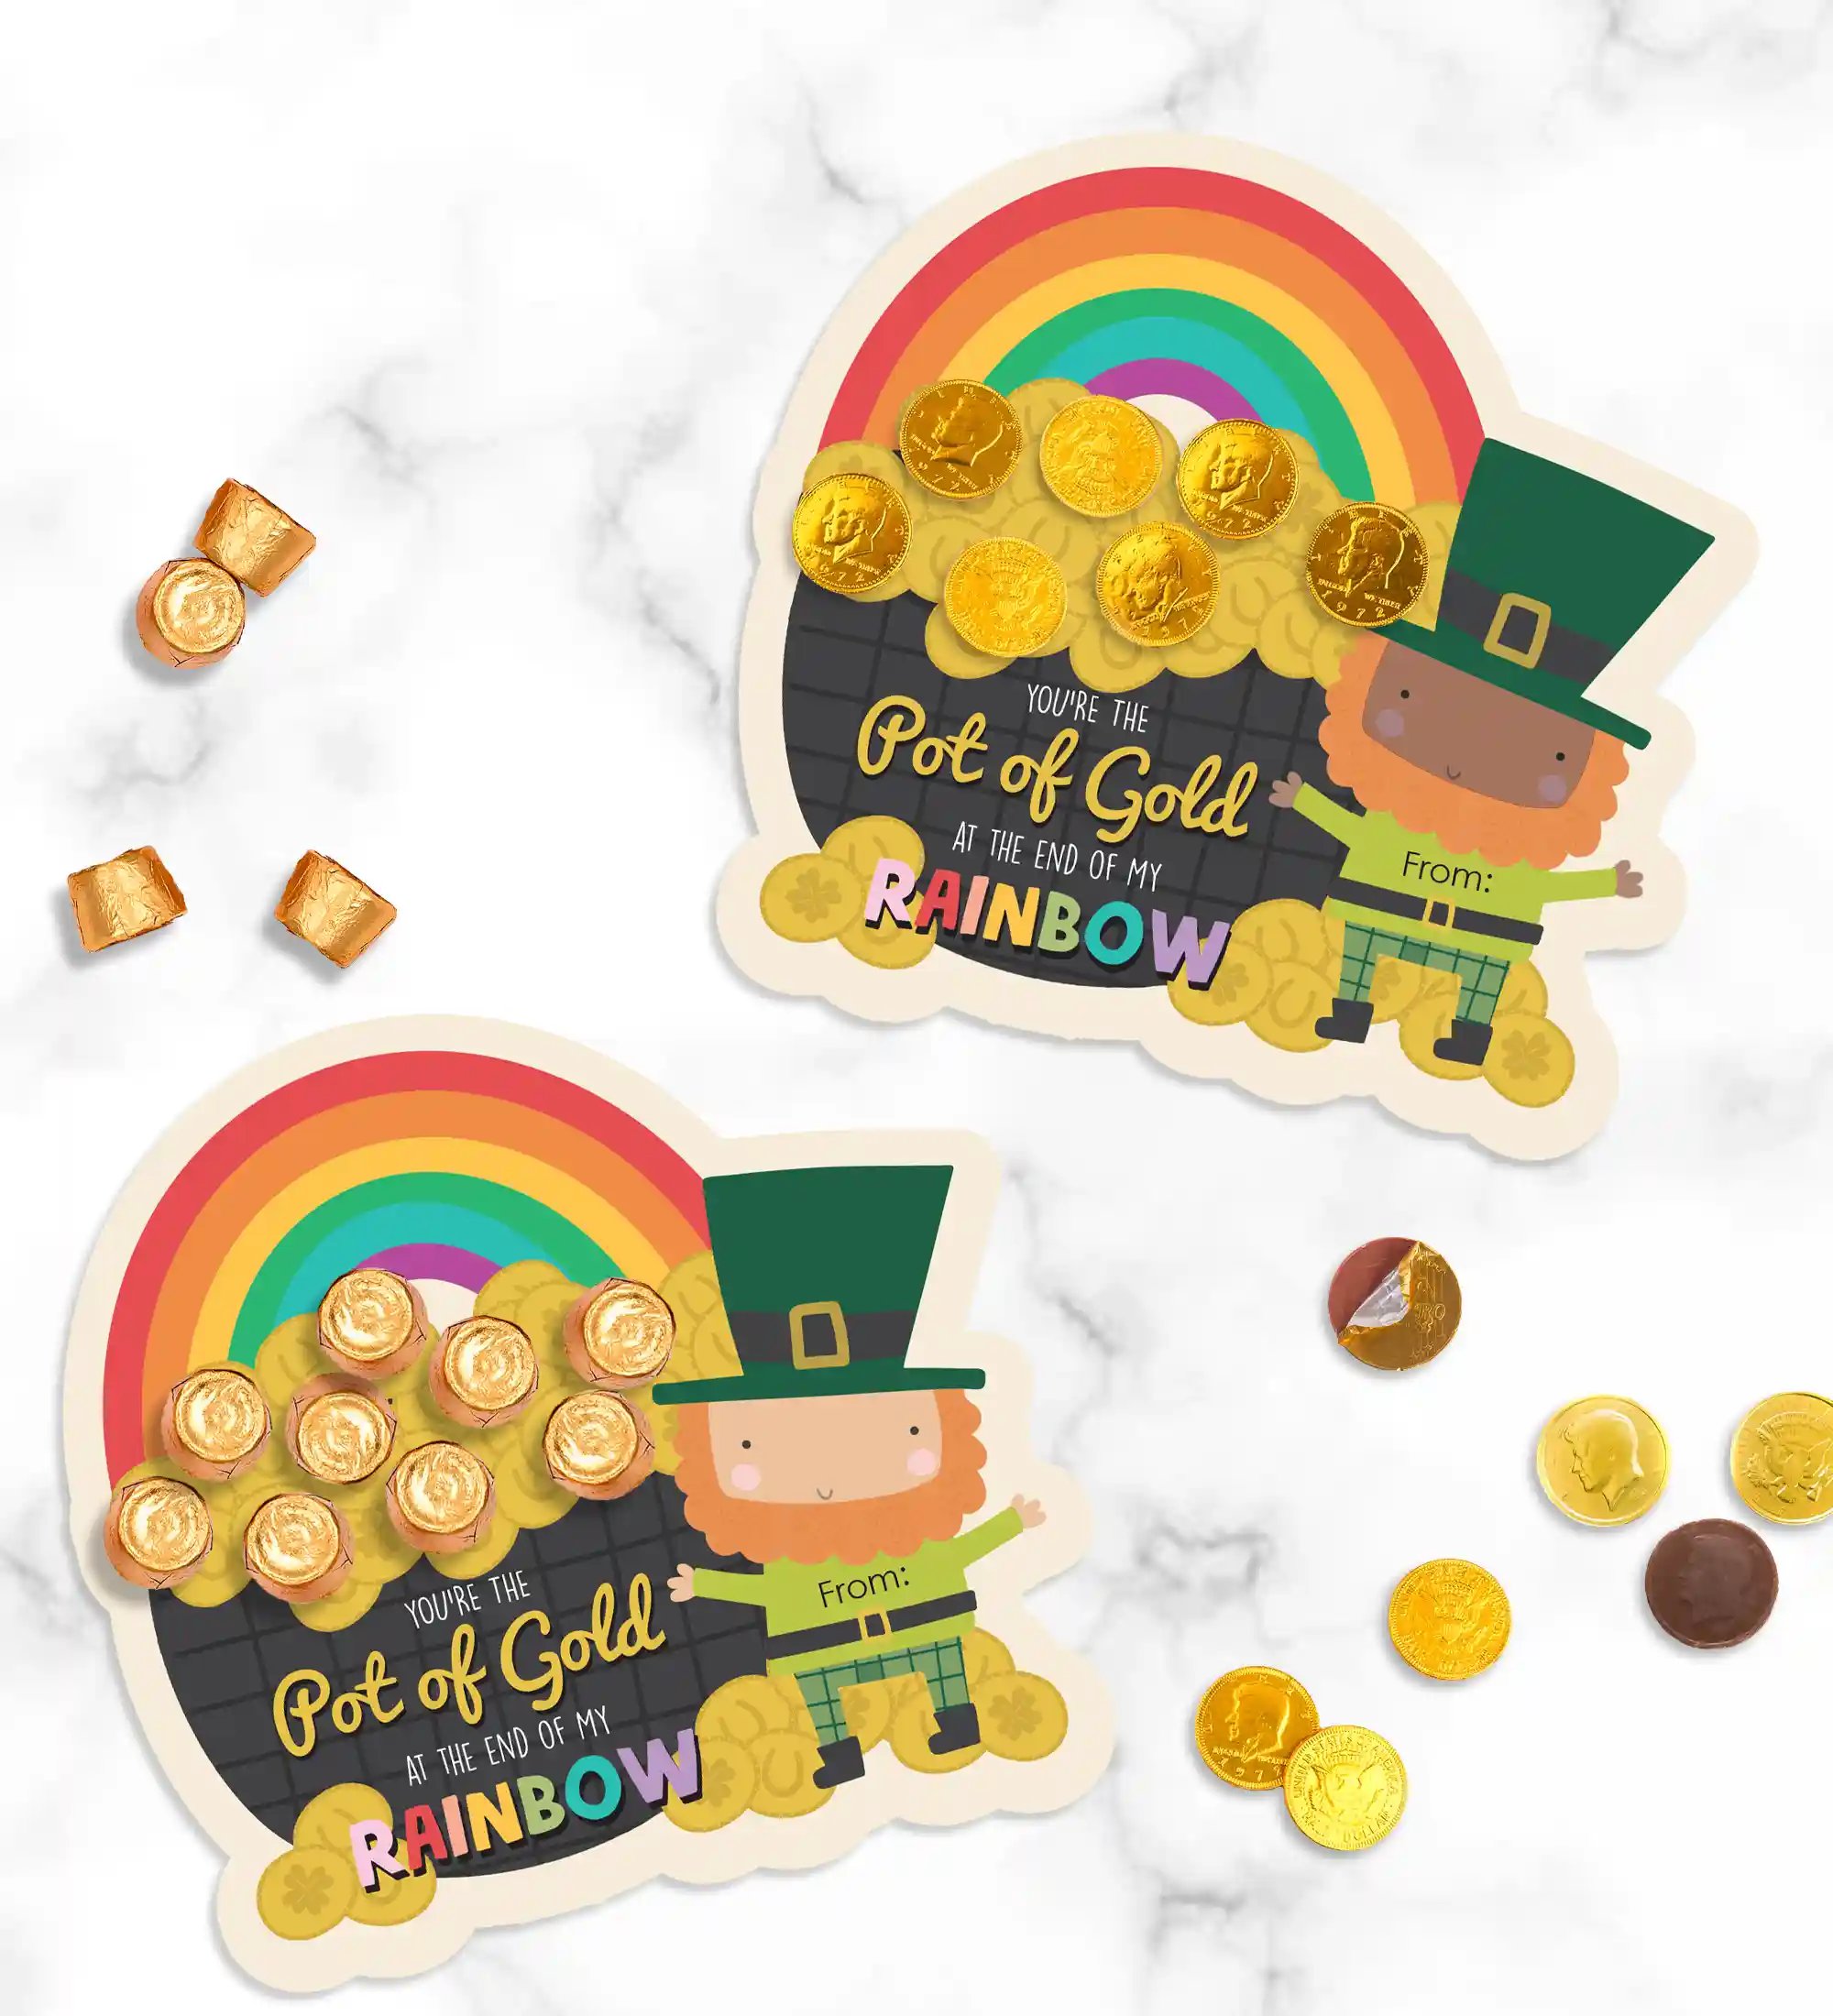 Printable St. Patrick's Day gift tag for a fun and easy gift for St. Patrick's Day. Gfit tag says: "You're the pot of gold at hte end of my rainbow!" Attach any gold candies for the gold coins. You could attach chocoloate gold coins, Rolo's, or even Hershey's gold nugget bars.